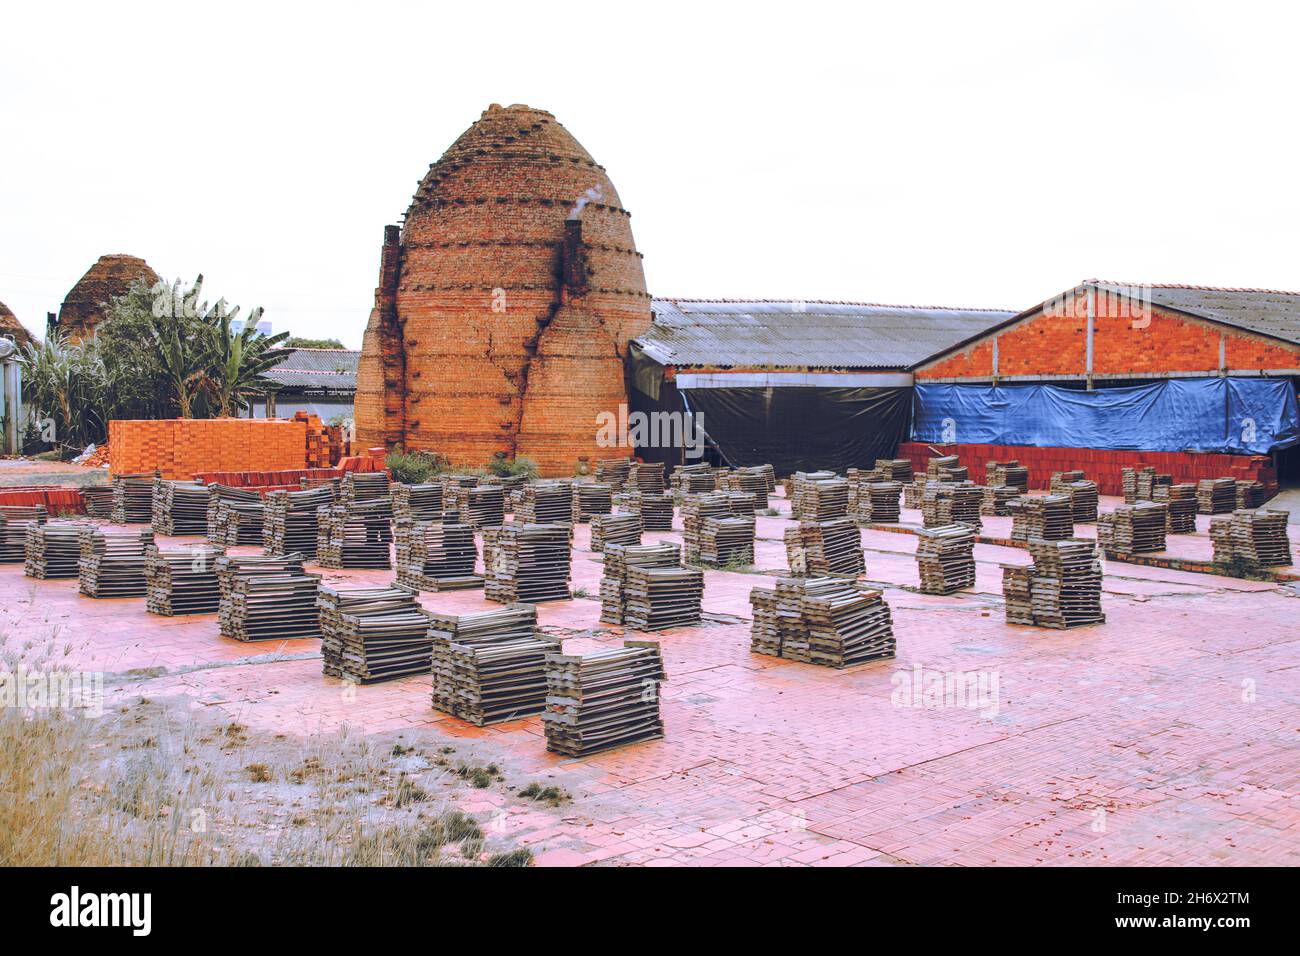 The famous centenarian traditional kilns for manufacturing handmade bricks in Vinh Long Province of Mekong Delta, Vietnam Stock Photo